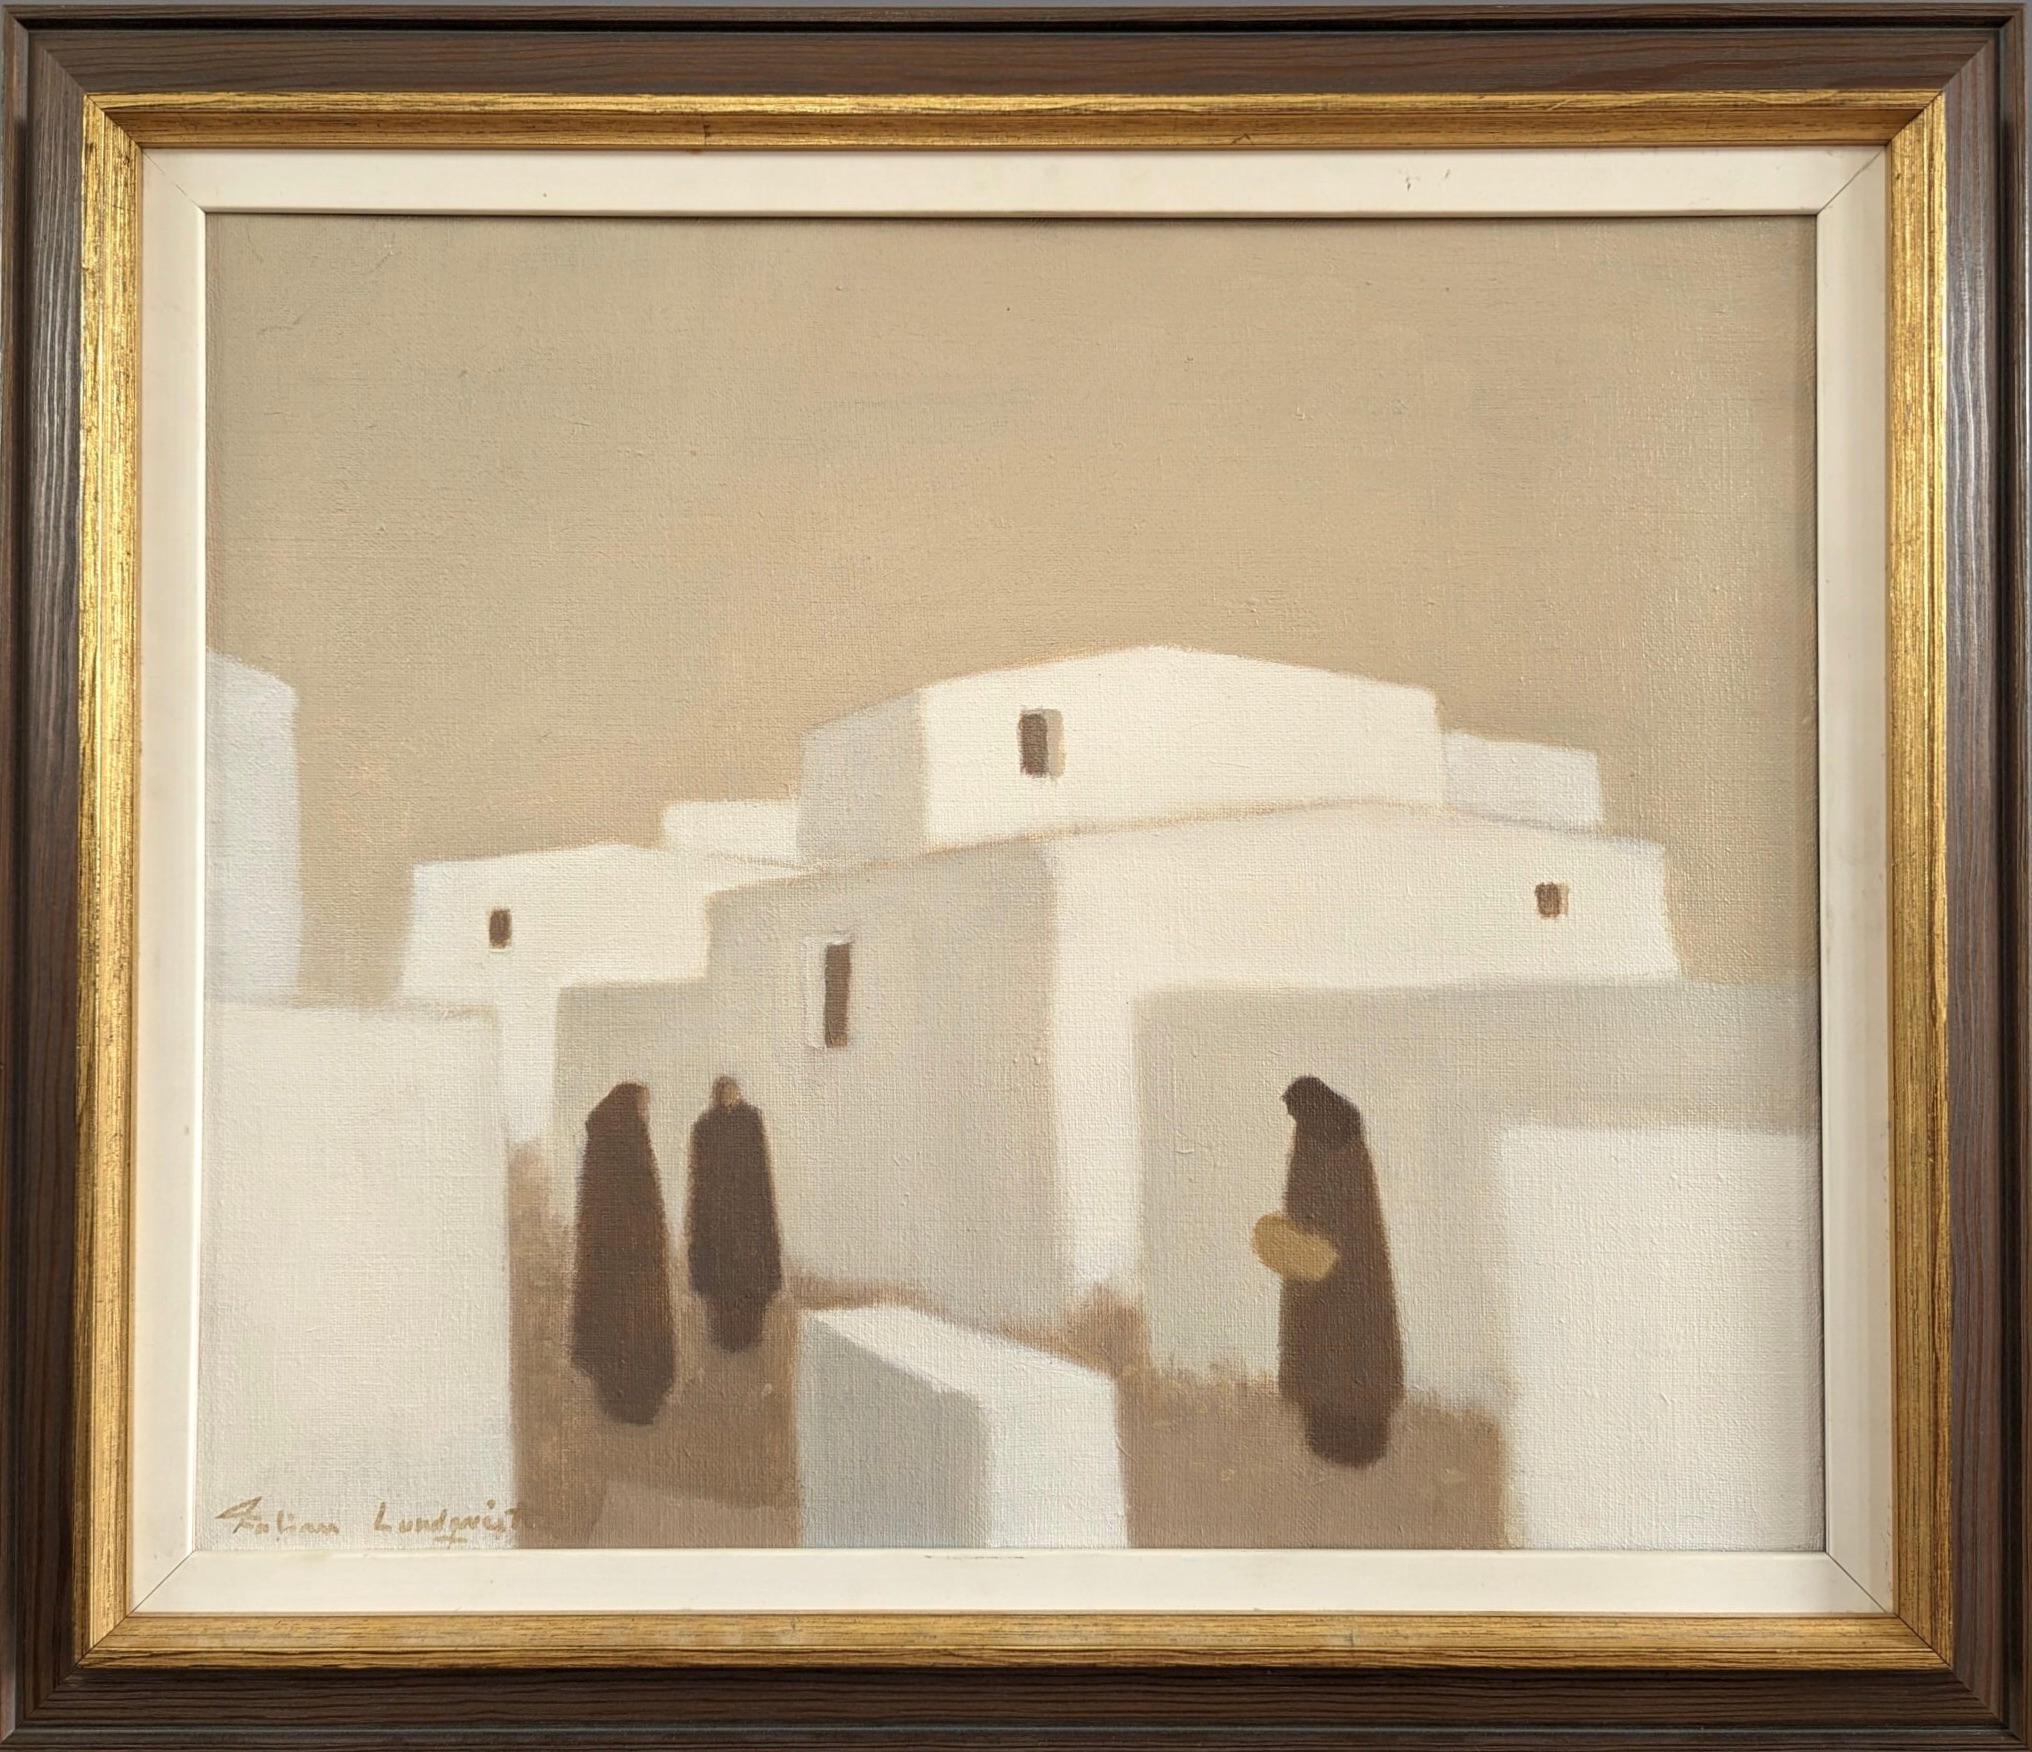 BY THE WHITE HOUSES
Size: 49 x 57 cm (including frame)
Oil on Canvas

A subtle and outstanding mid-century modernist style composition, executed in oil onto canvas by the established Swedish artist Fabian Lundqvist (1913-1989), whose works have been